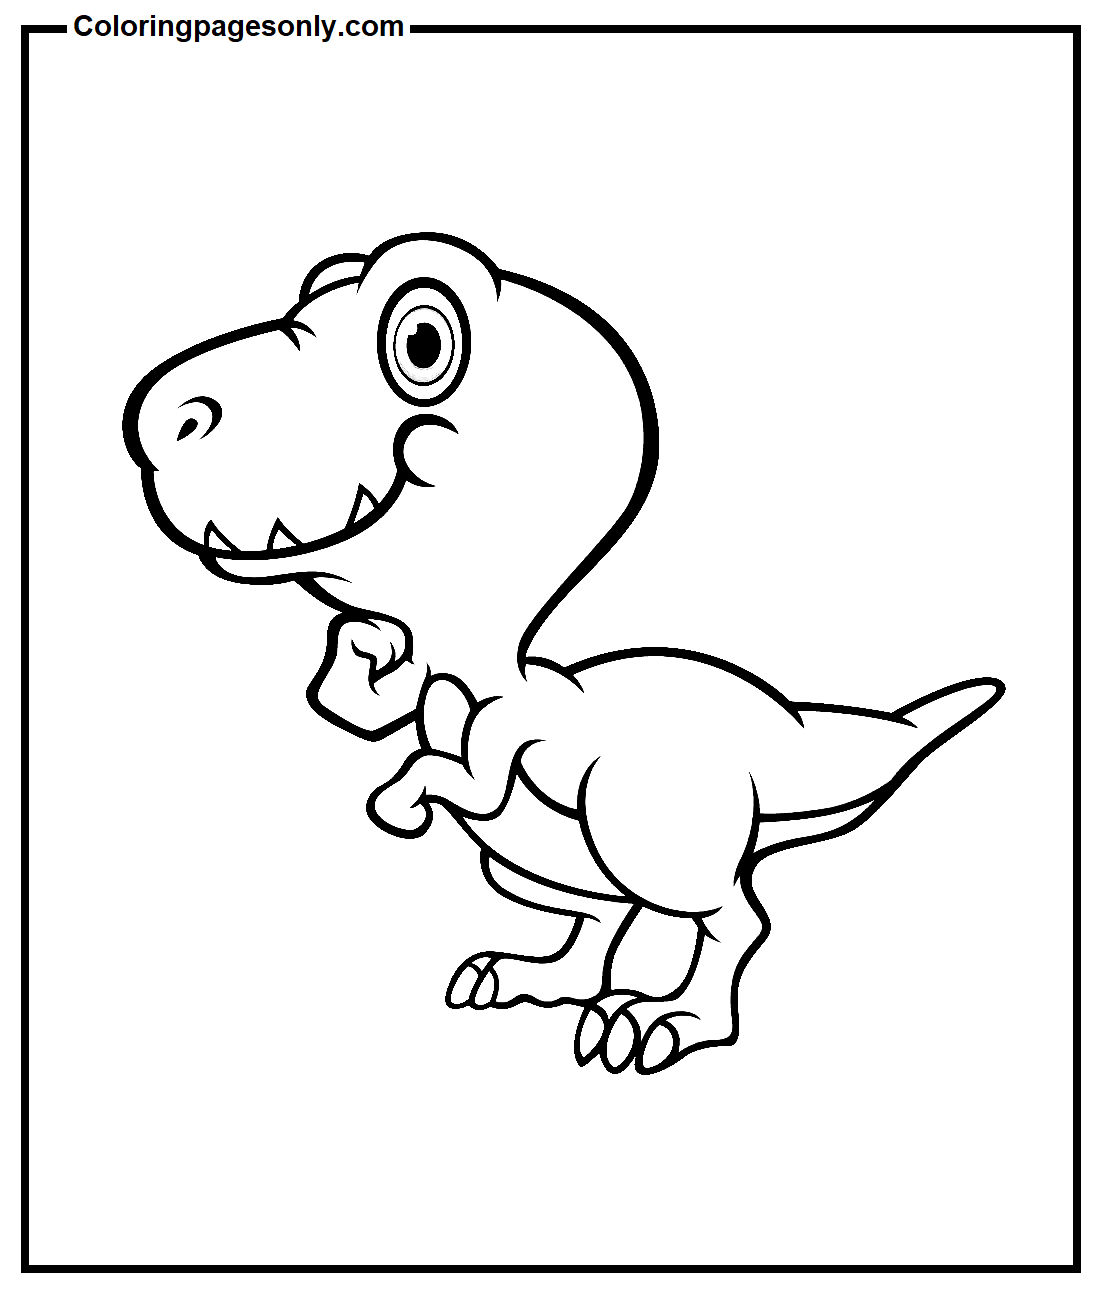 Smiling Tyrannosaurus rex Coloring Pages - Tyrannosaurus Rex Coloring Pages  - Coloring Pages For Kids And Adults